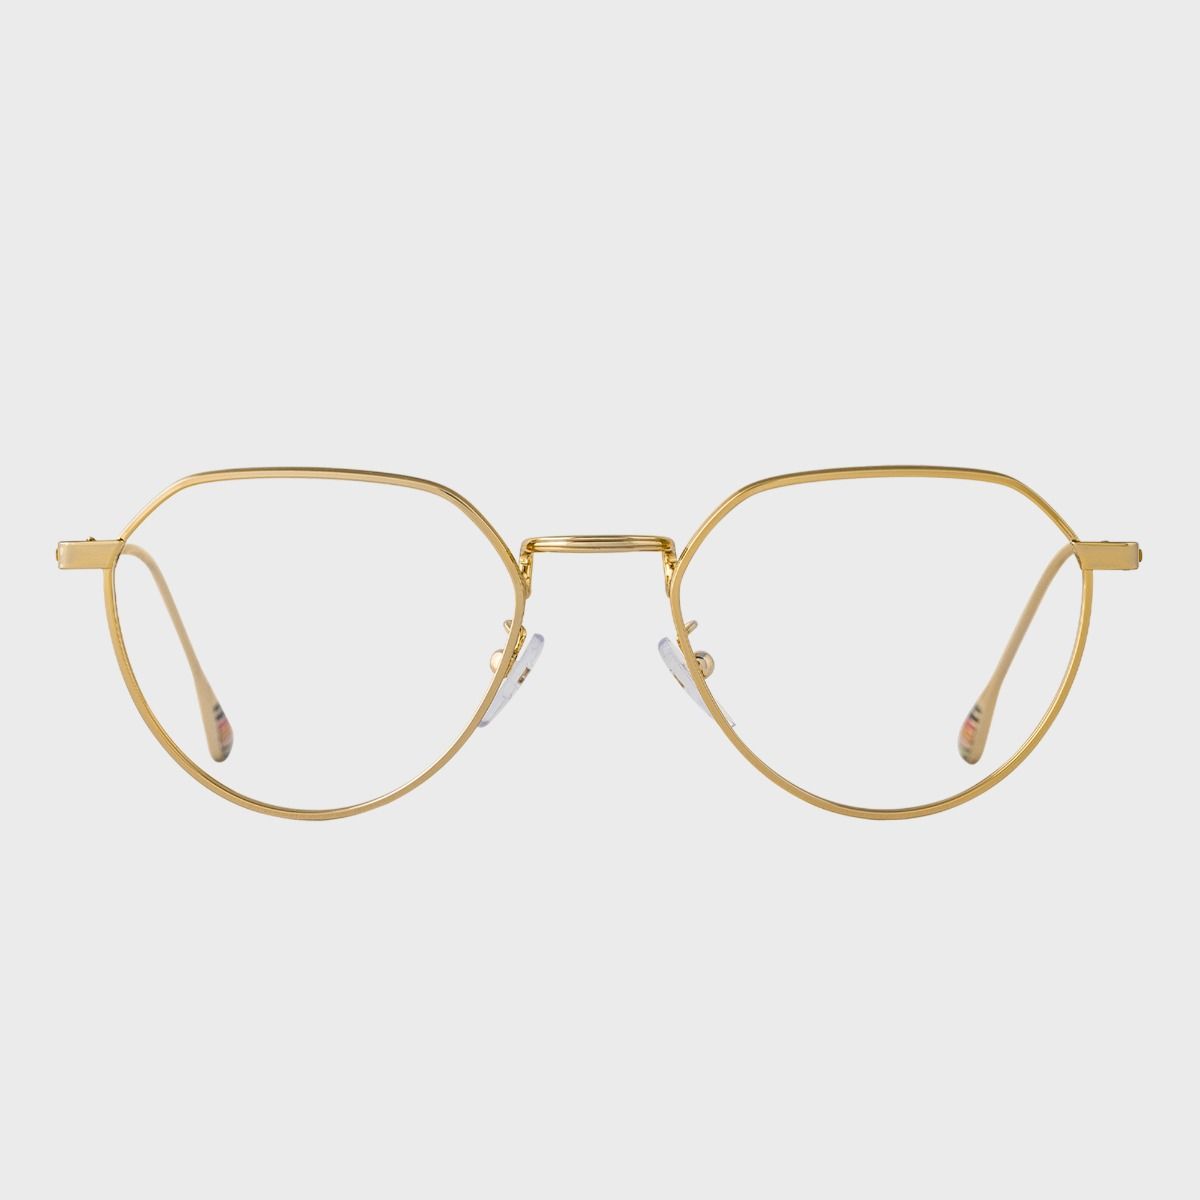 Paul Smith Fisher Optical Round Glasses